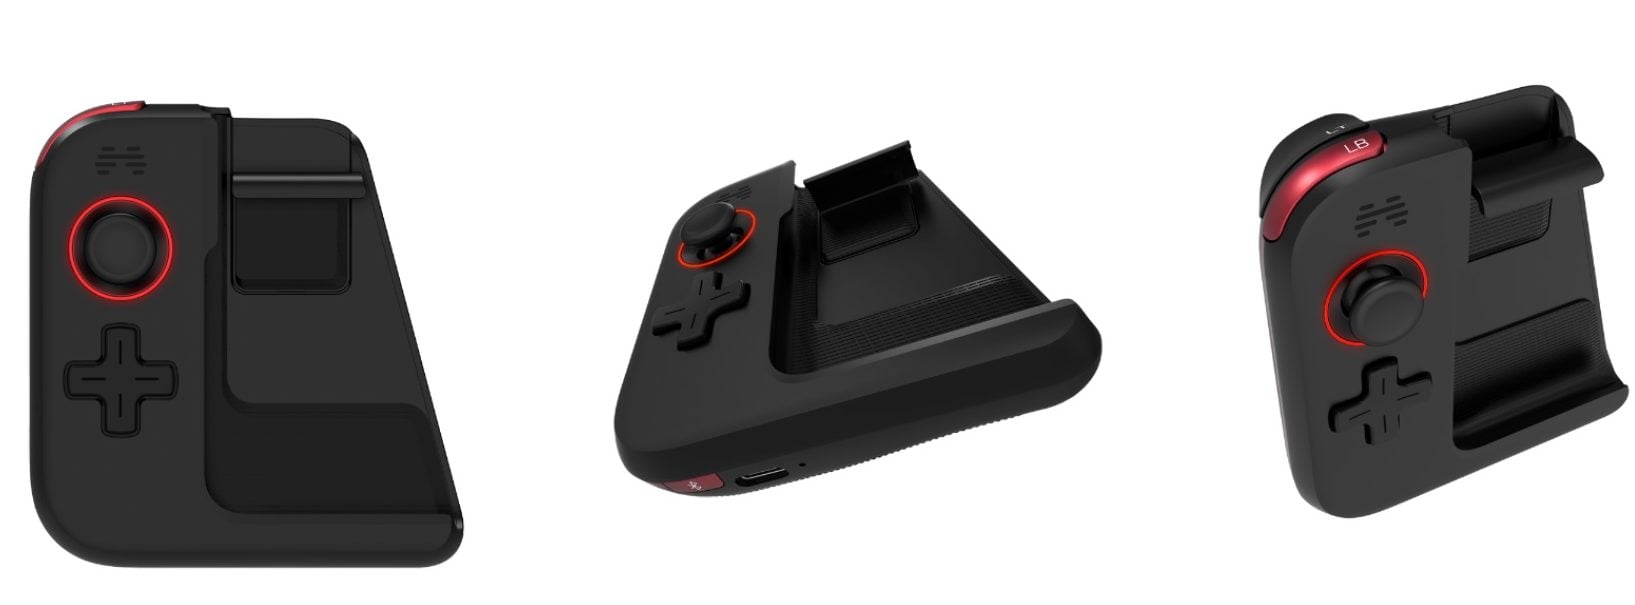 BETOP G1 Game Controller all angles